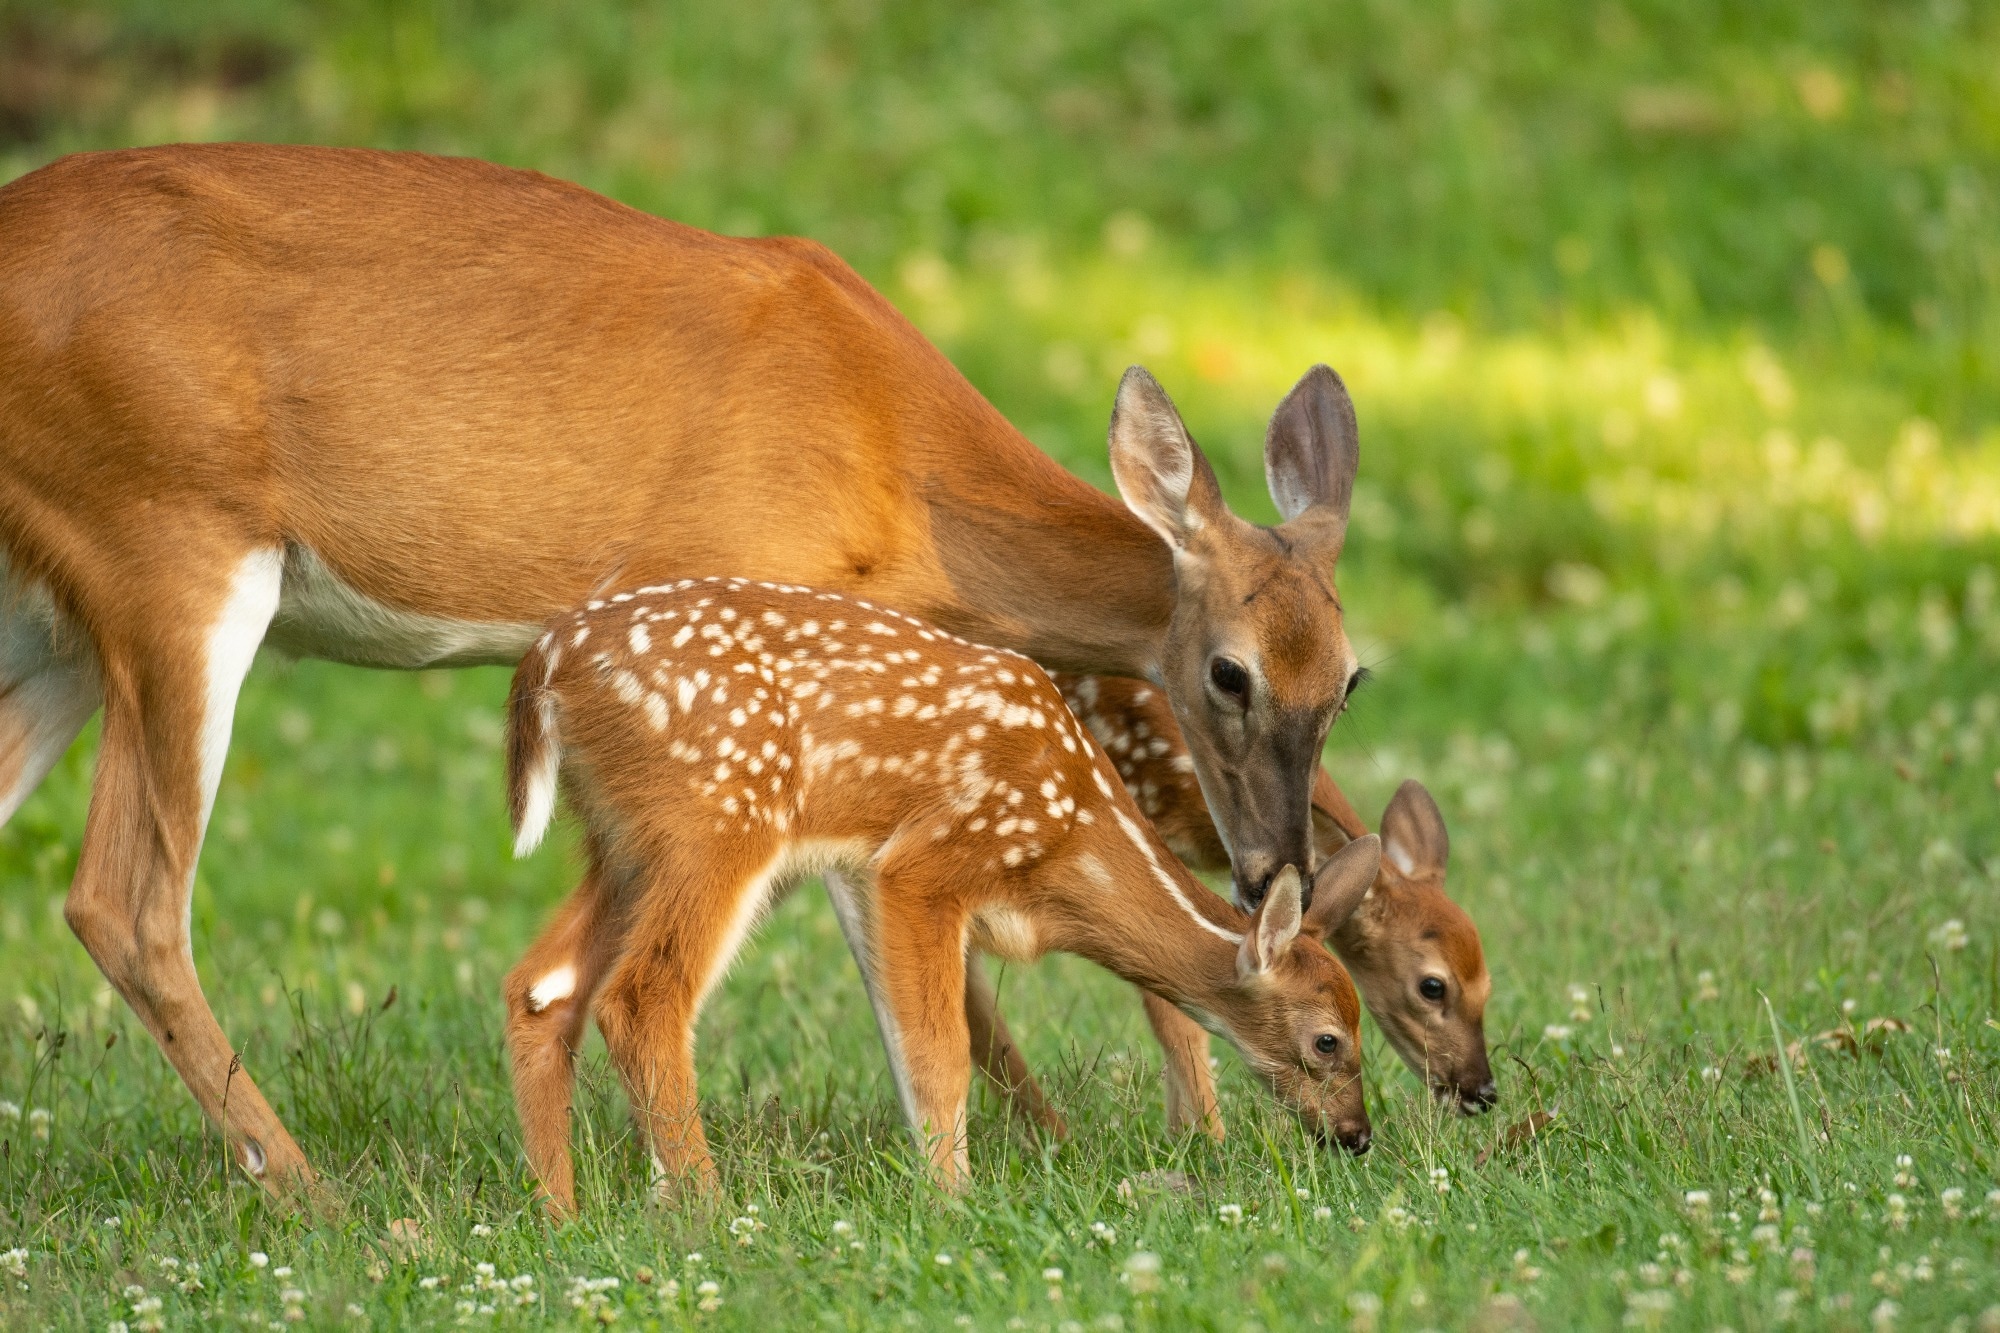 Study: Epidemiological Dynamics of SARS-CoV-2 in White-tailed Deer. Image Credit: TonyCampbell/Shutterstock.com